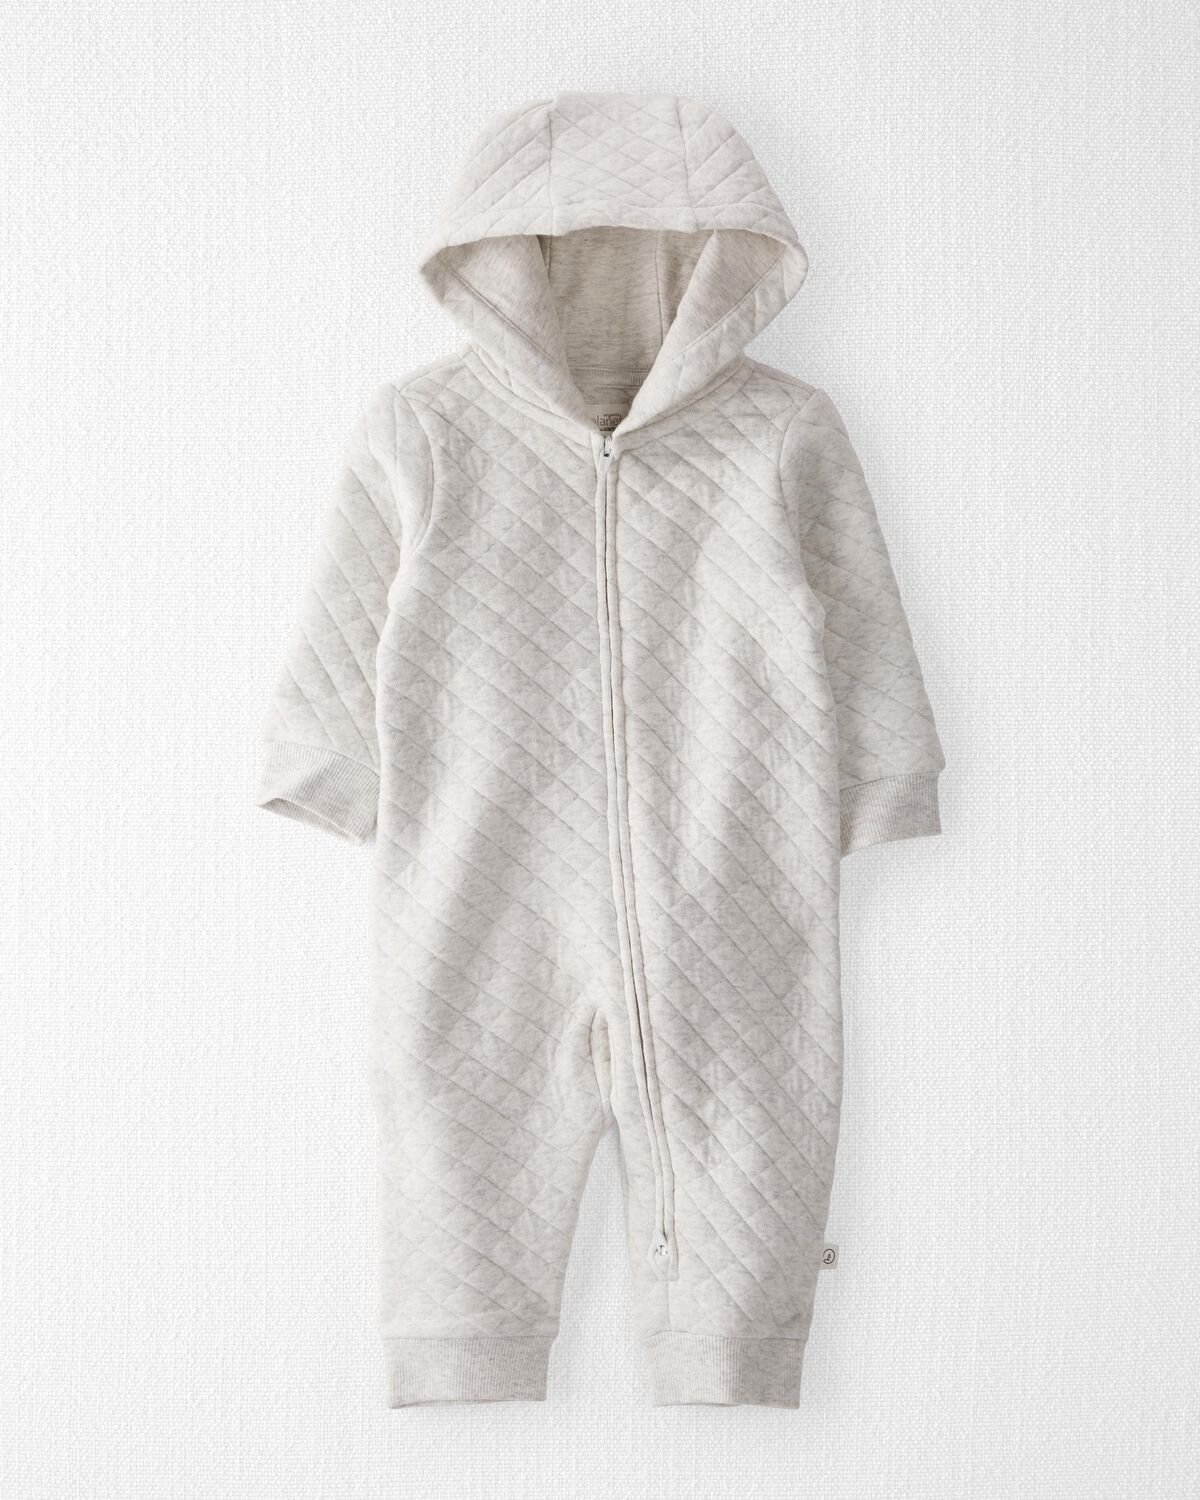 Baby Quilted Double Knit Jumpsuit Made with Organic Cotton in Heather Gray